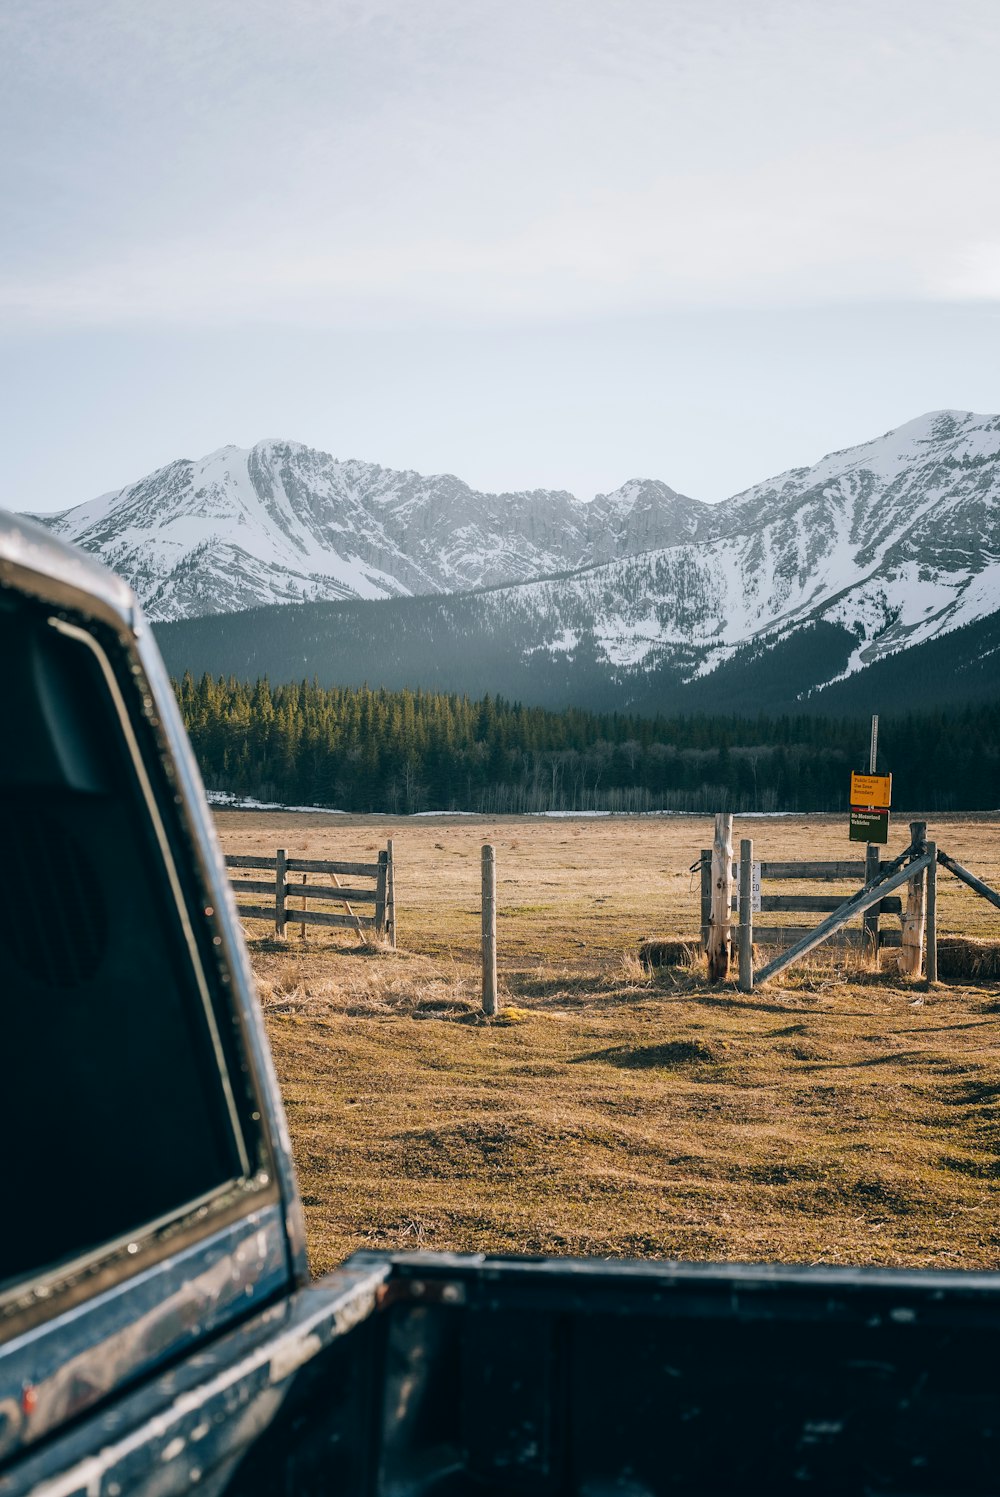 a truck parked in a field with mountains in the background